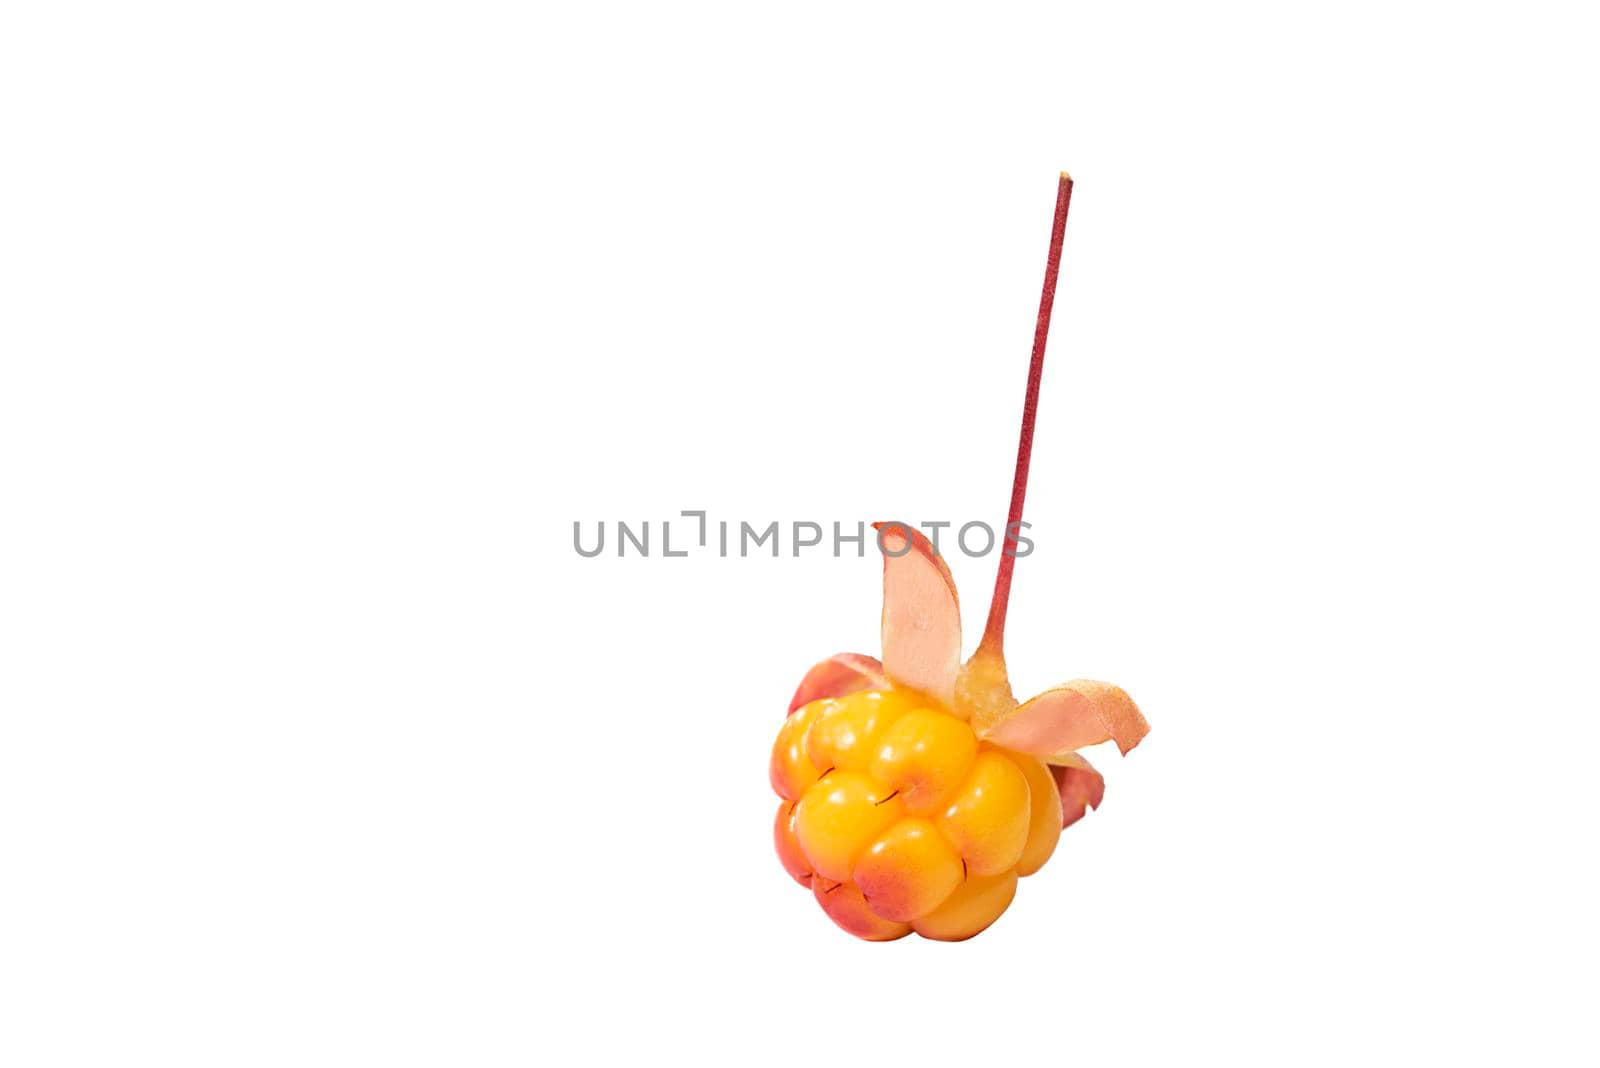 Ripe yellow cloudberry isolated on a white background